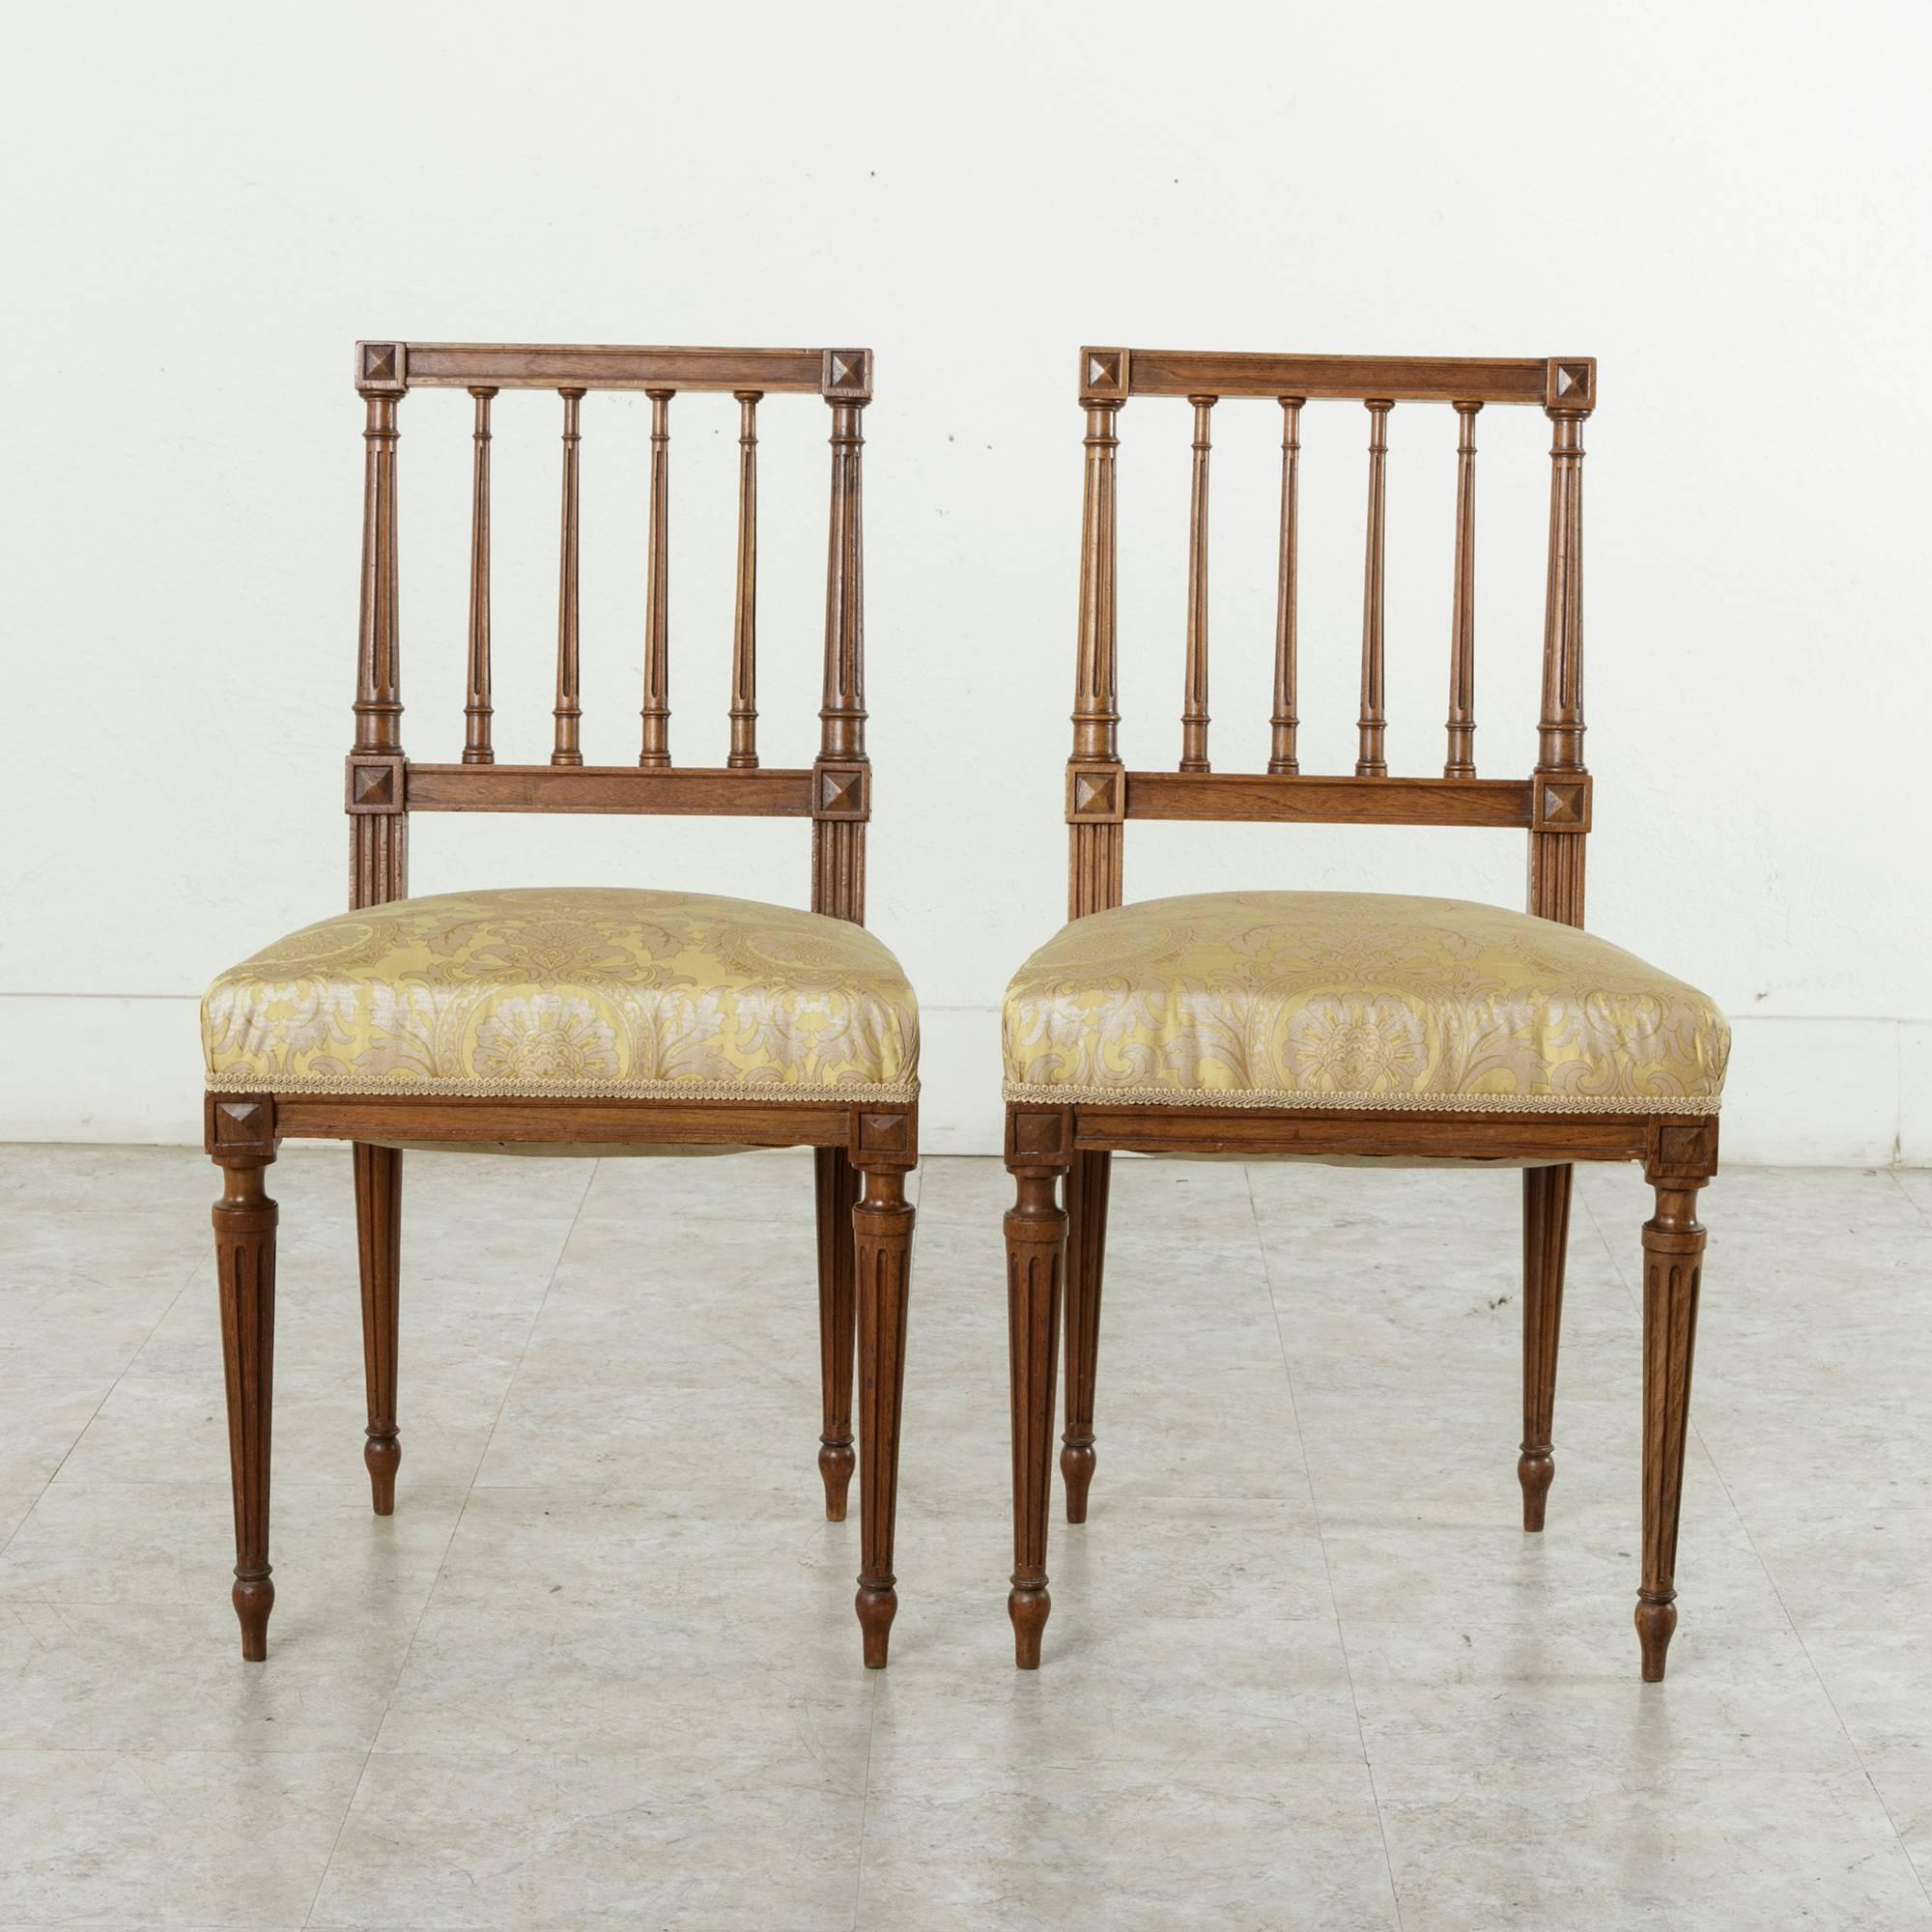 This pair of hand-carved French walnut side chairs in the Louis XVI style dates to the late nineteenth century. Featuring tapered fluted legs with carved diamonds at the die joints, they have been recently re-upholstered in yellow silk. As opera